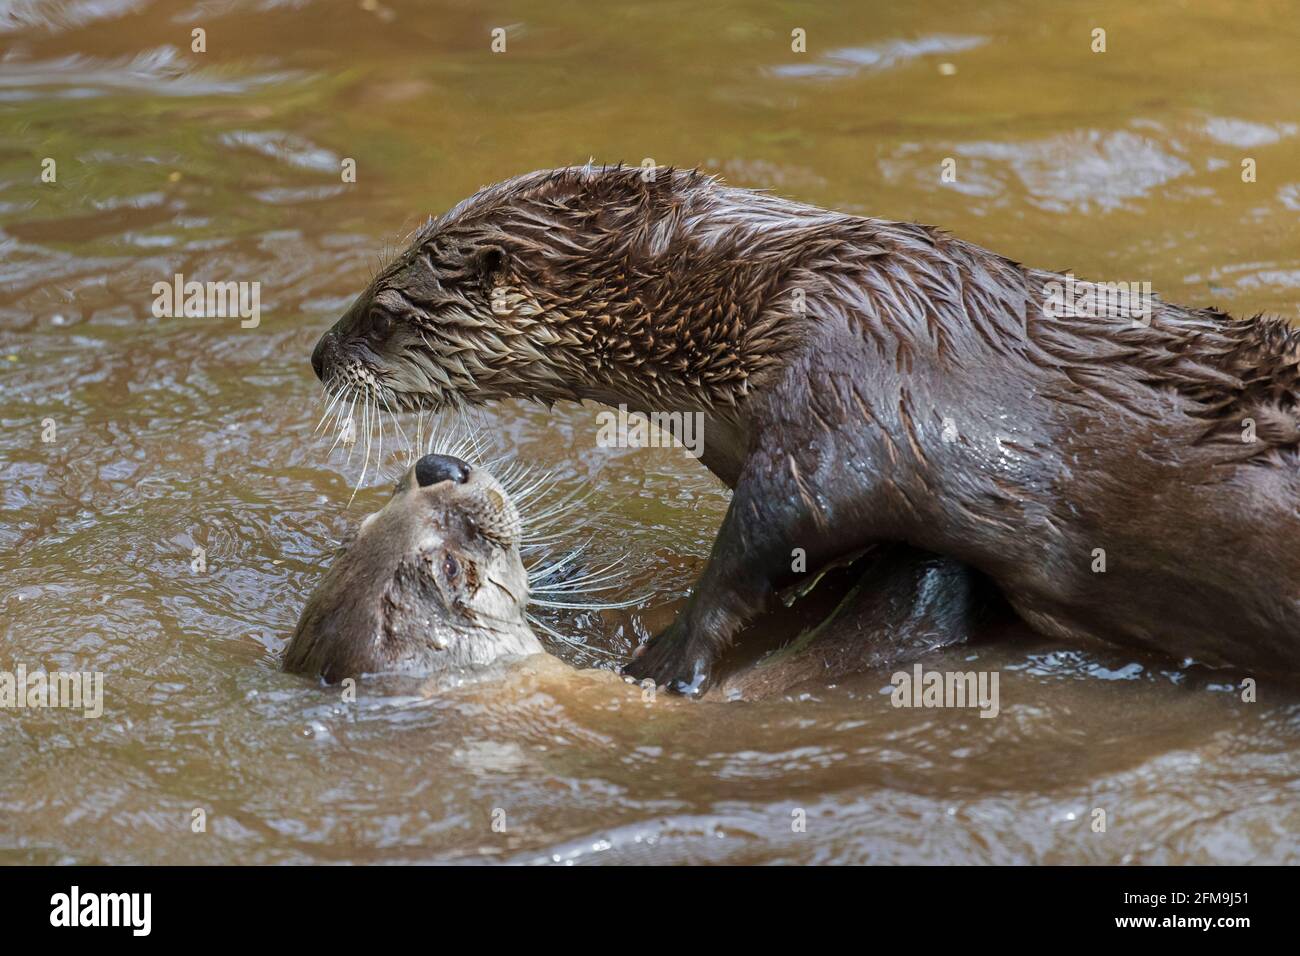 Two Eurasian otters / European river otter (Lutra lutra) playing / play fighting in water of creek / brook in spring Stock Photo